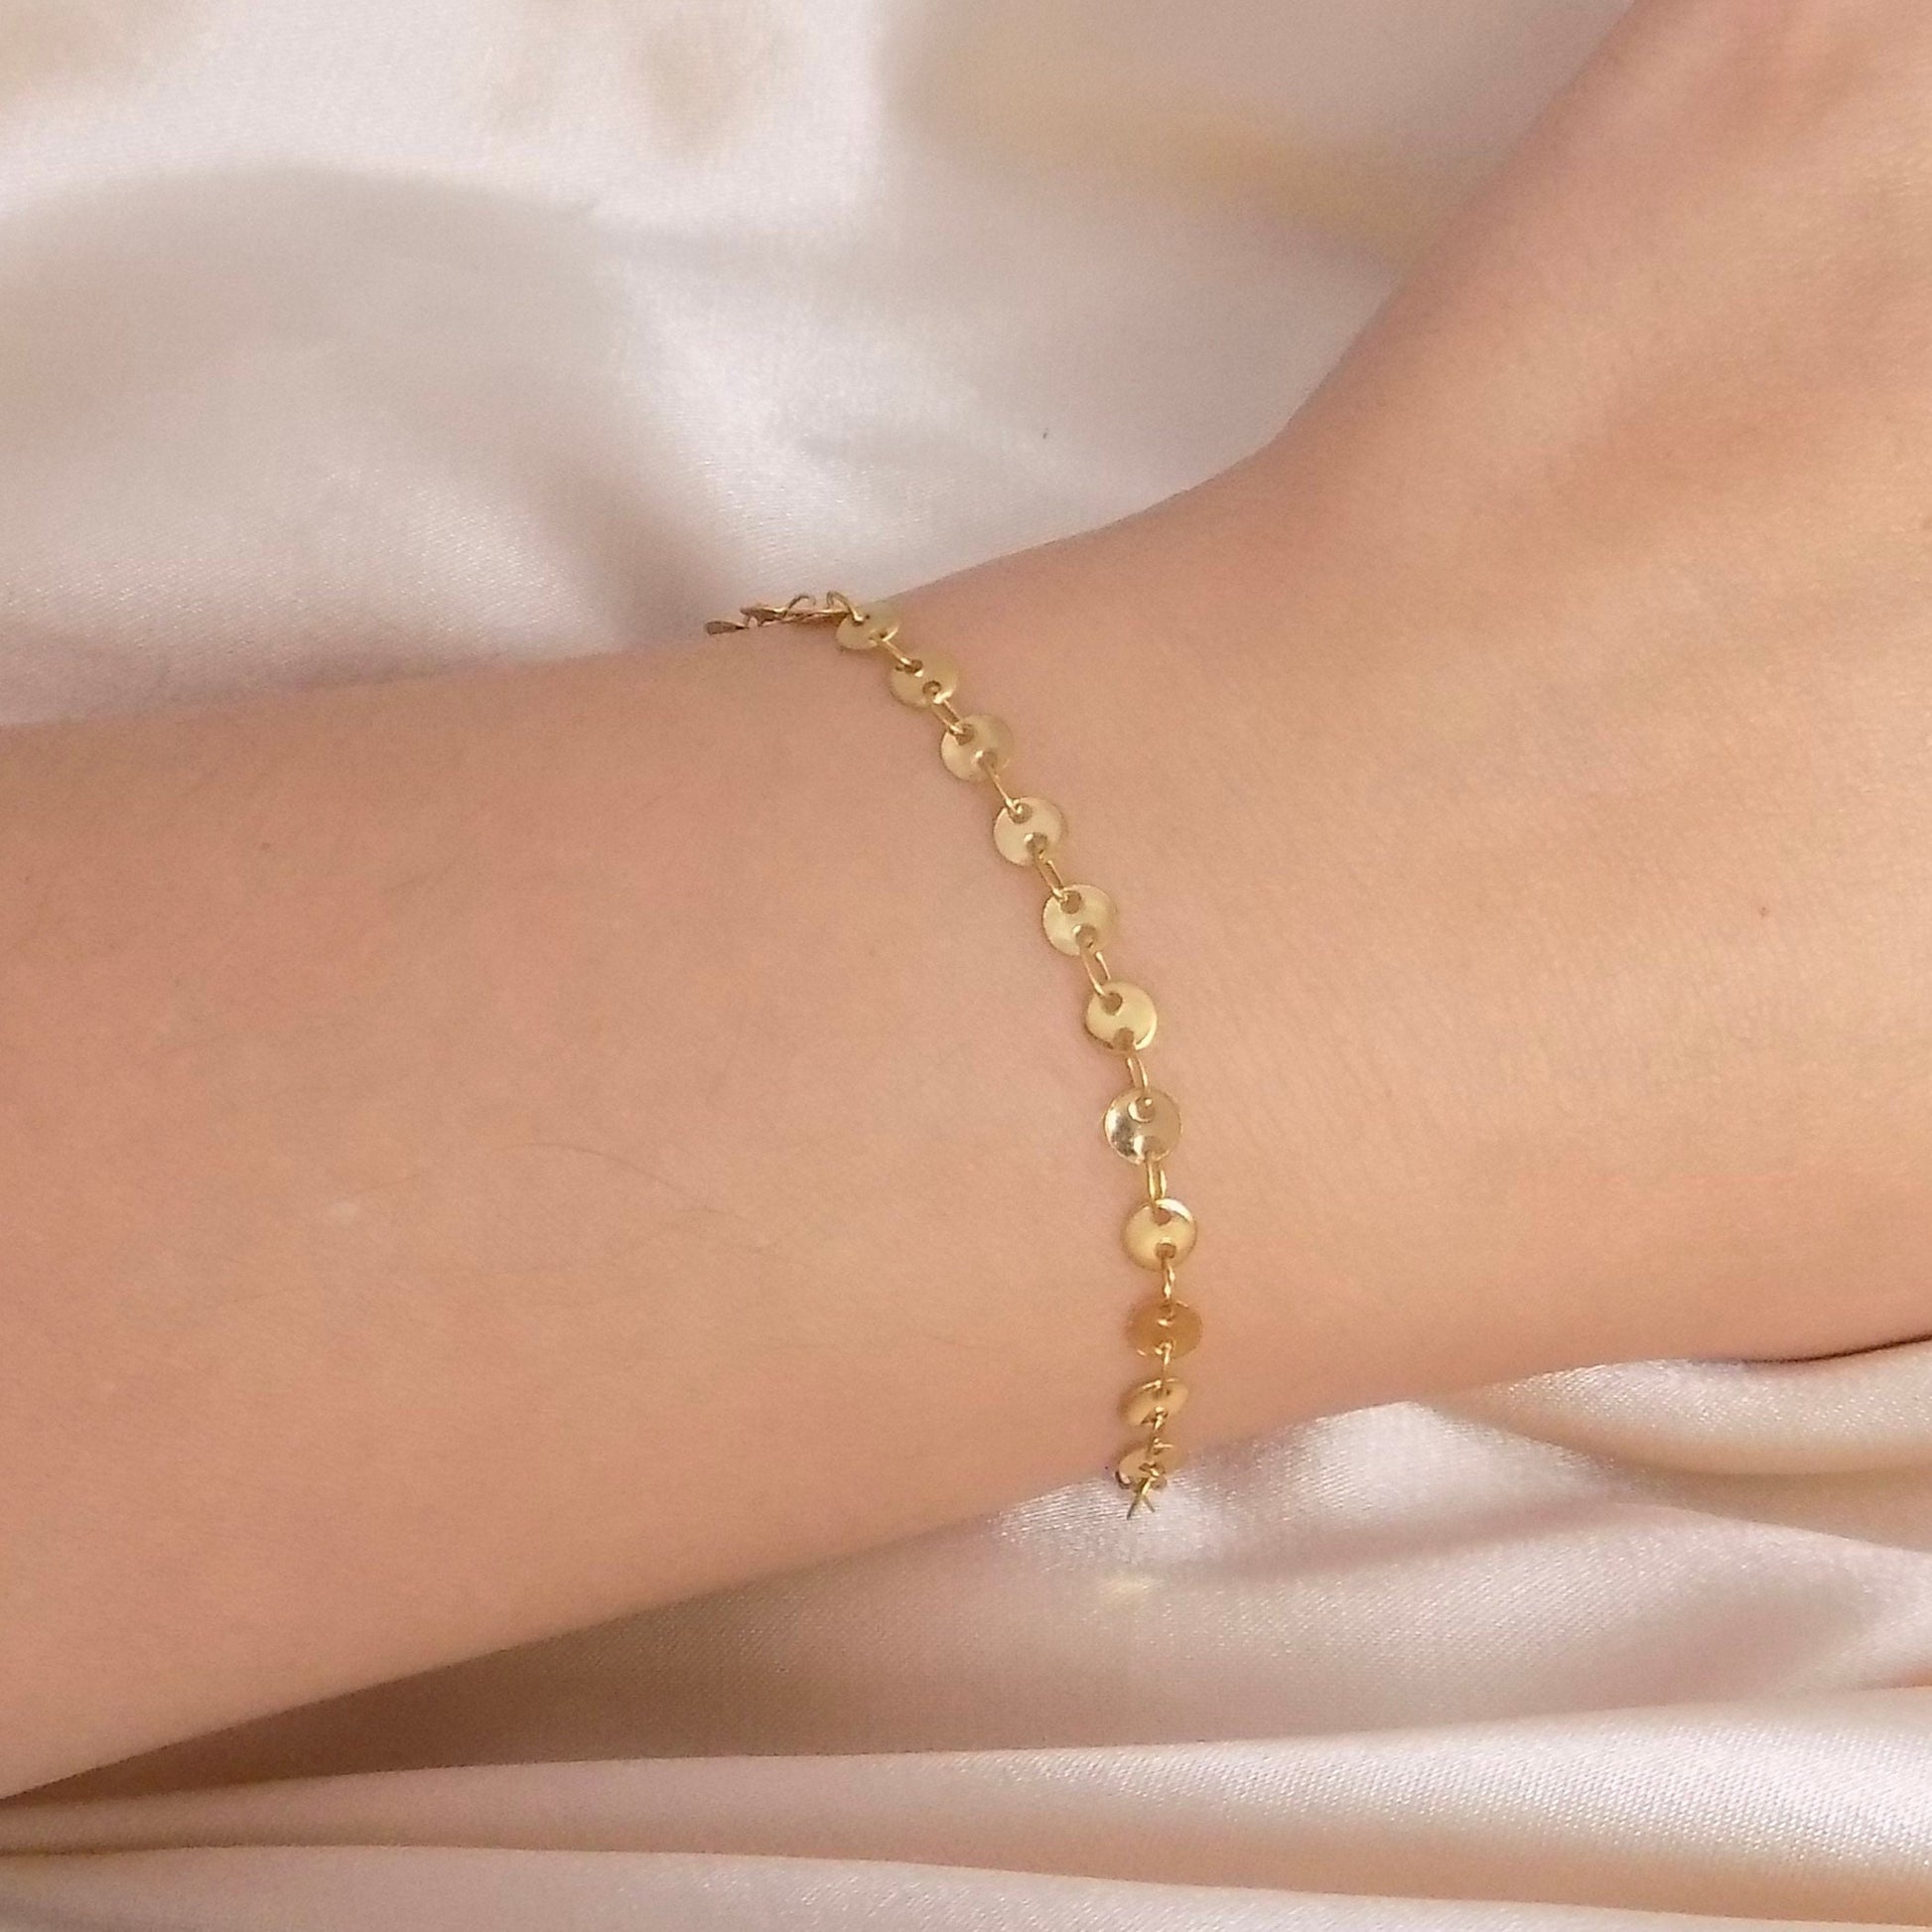 Sequin Chain Bracelet, 18K Gold Stainless Steel, Delicate Gold Layer, Dainty Super Thin Bracelet, Simple Everyday Adjustable, M7-77